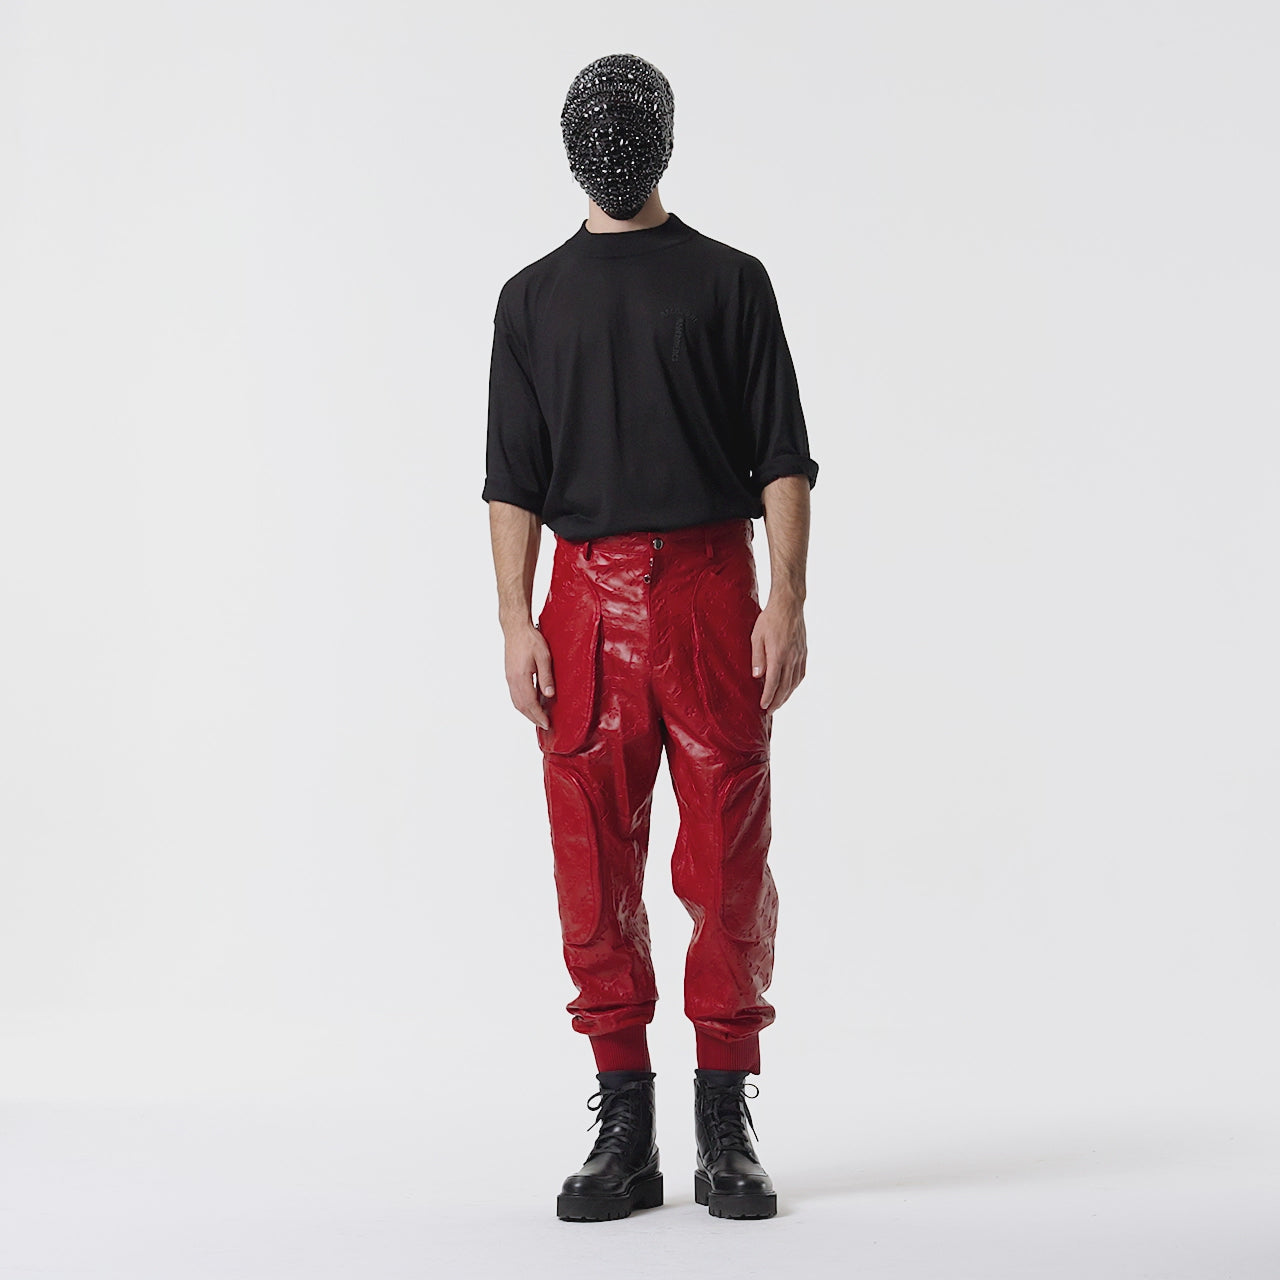 RED LEATHER JOGGER PANTS